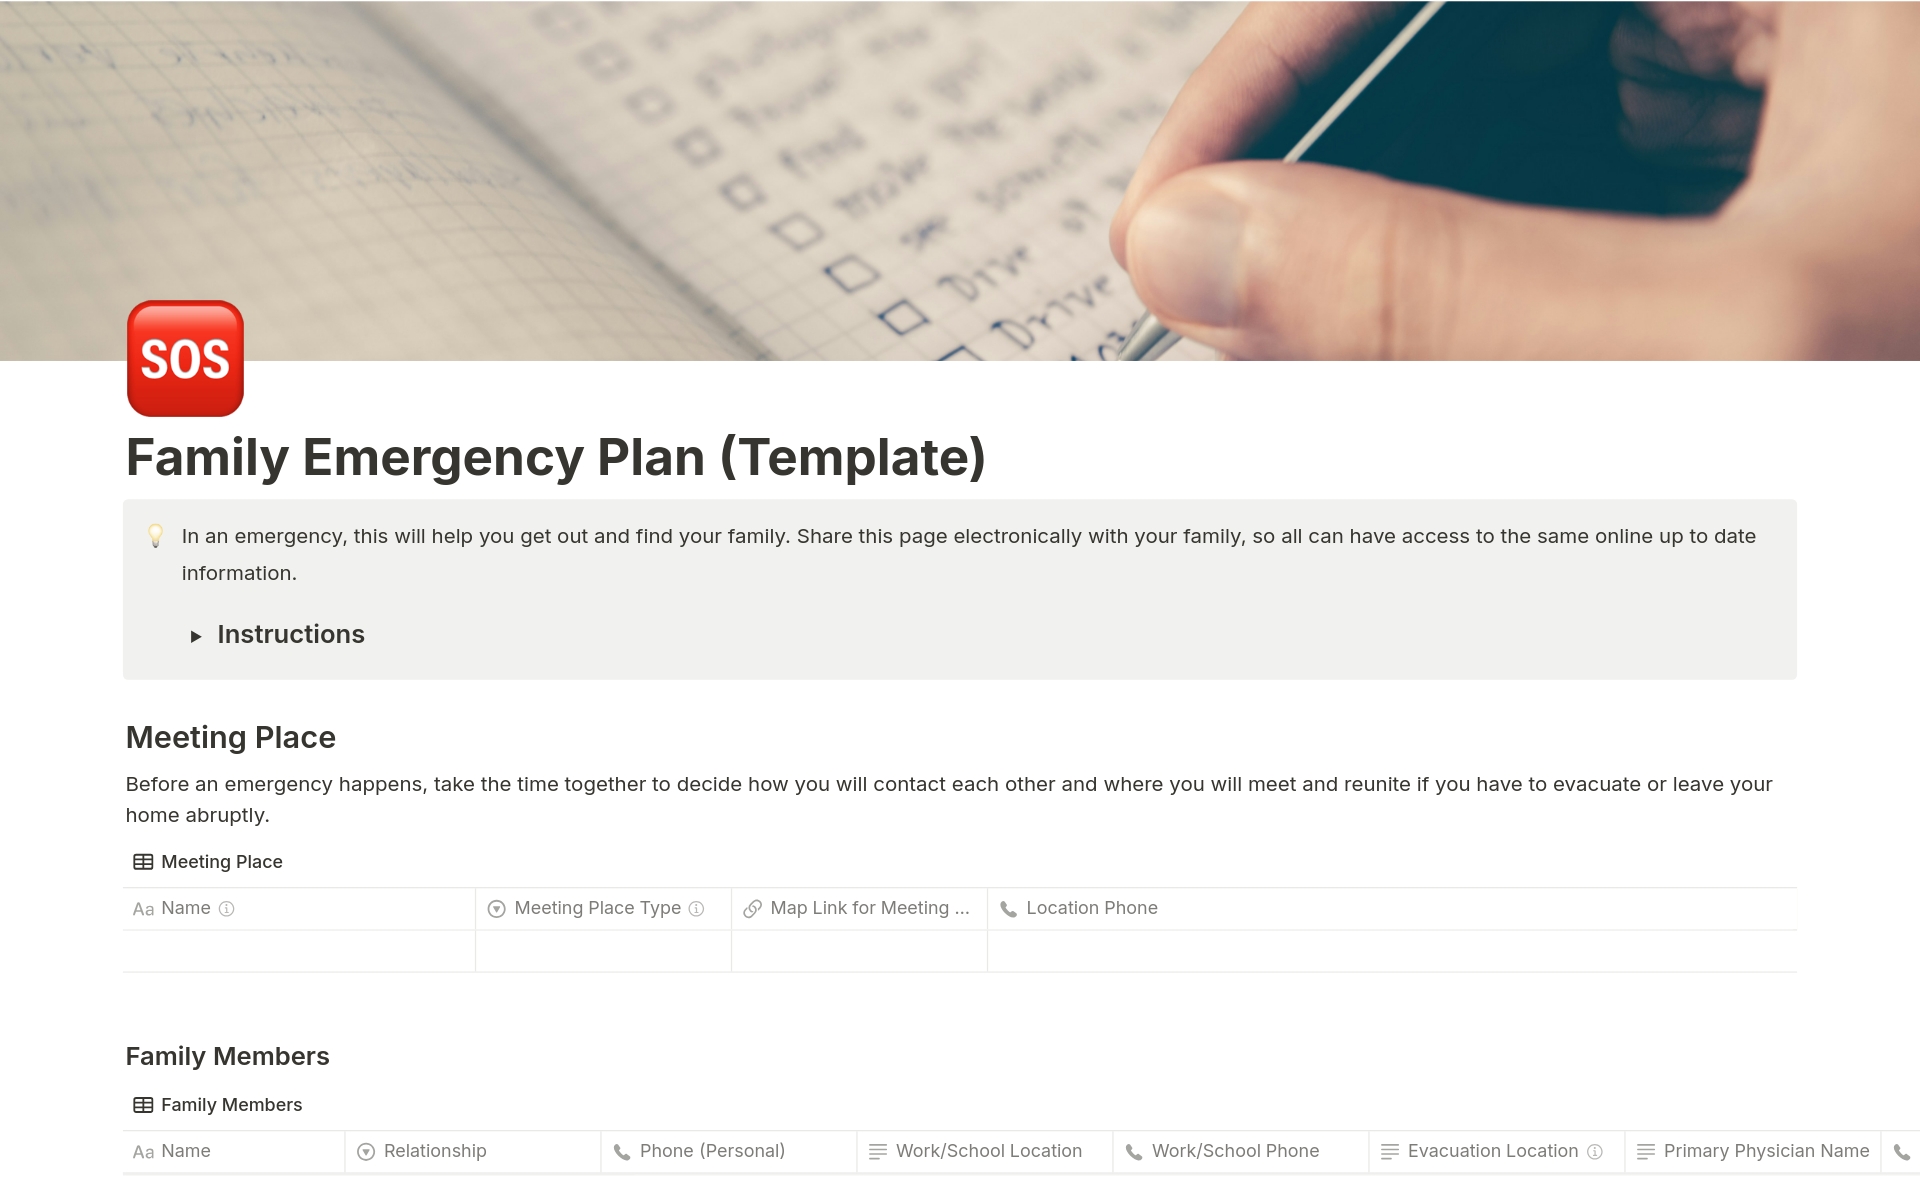 In an emergency, this will help you get out and find your family. Document where you will meet and information about your family members